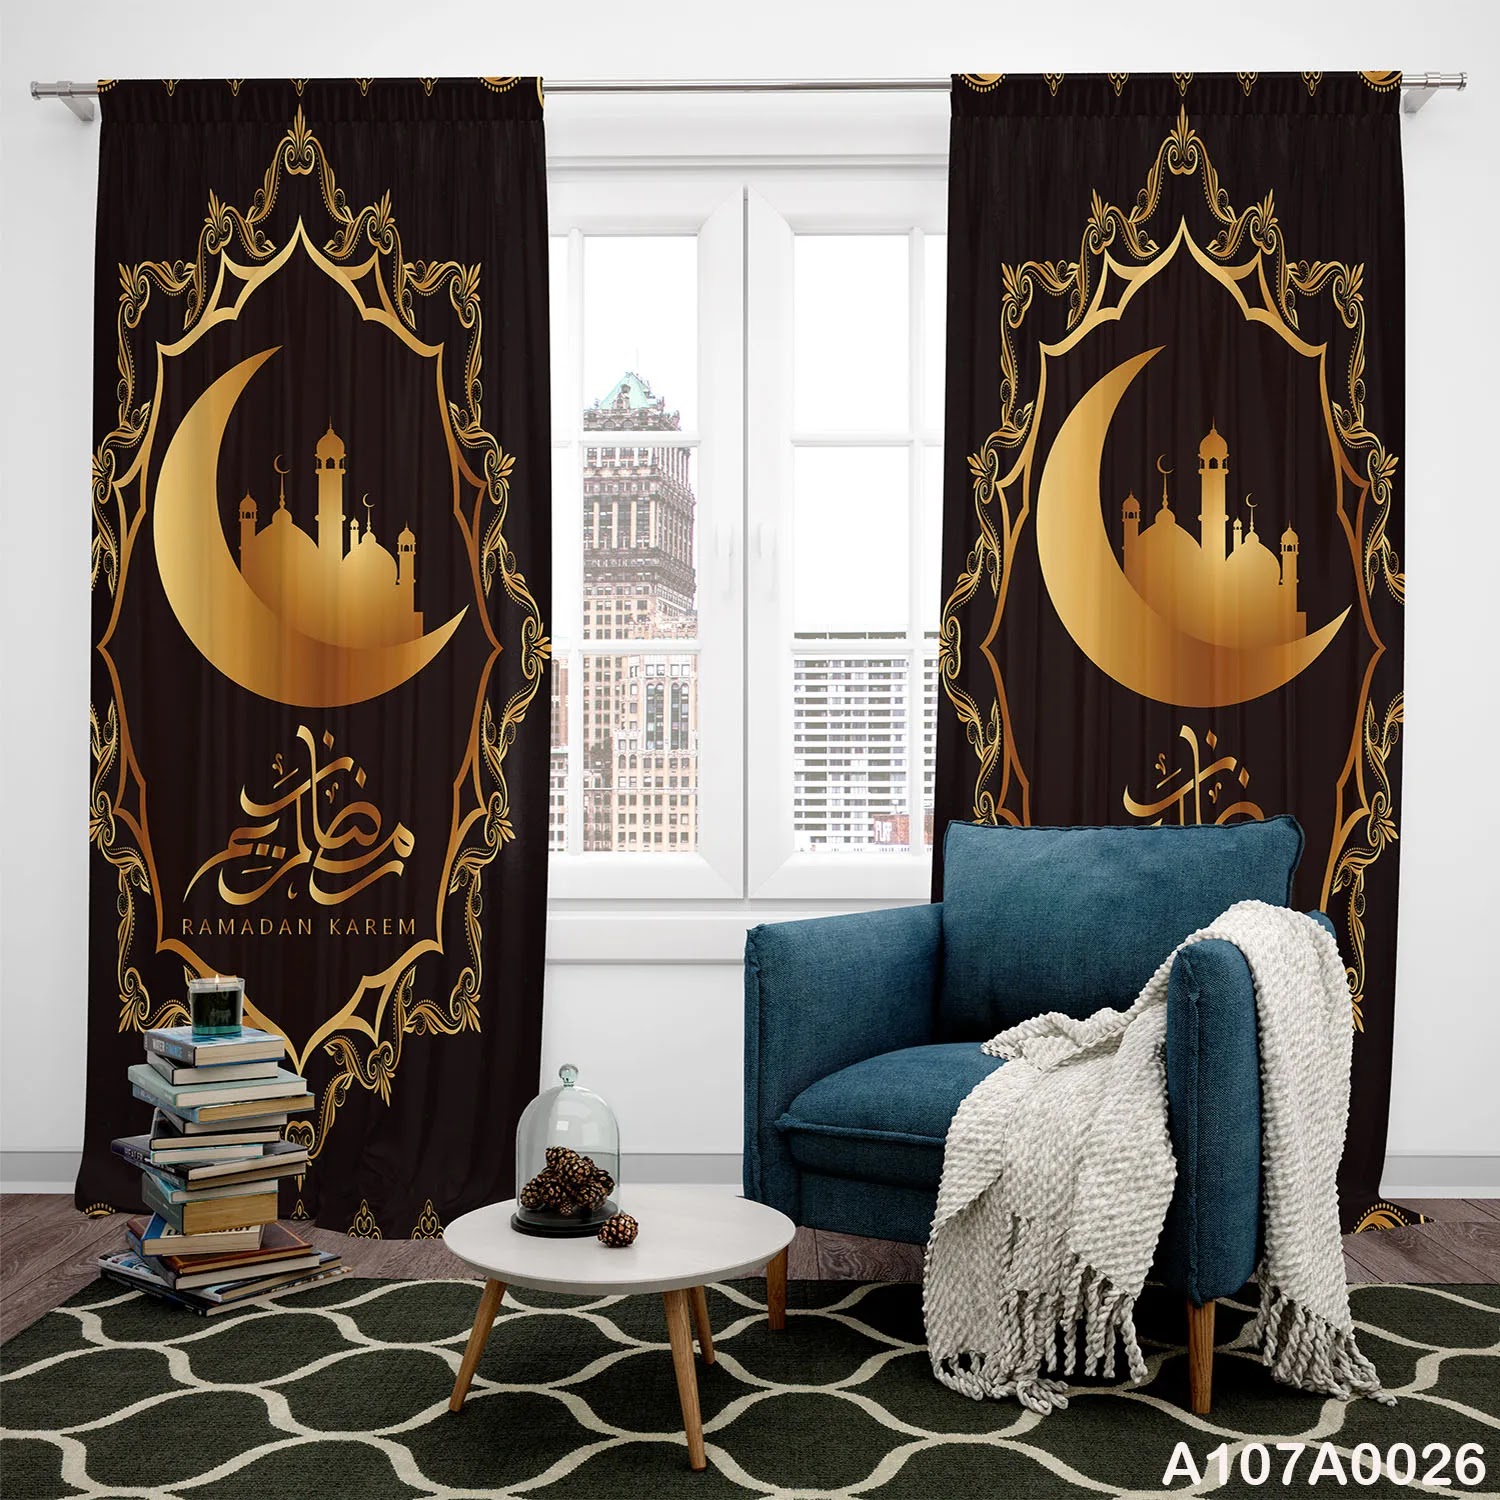 Curtains in black and gold for Rmadan kareem